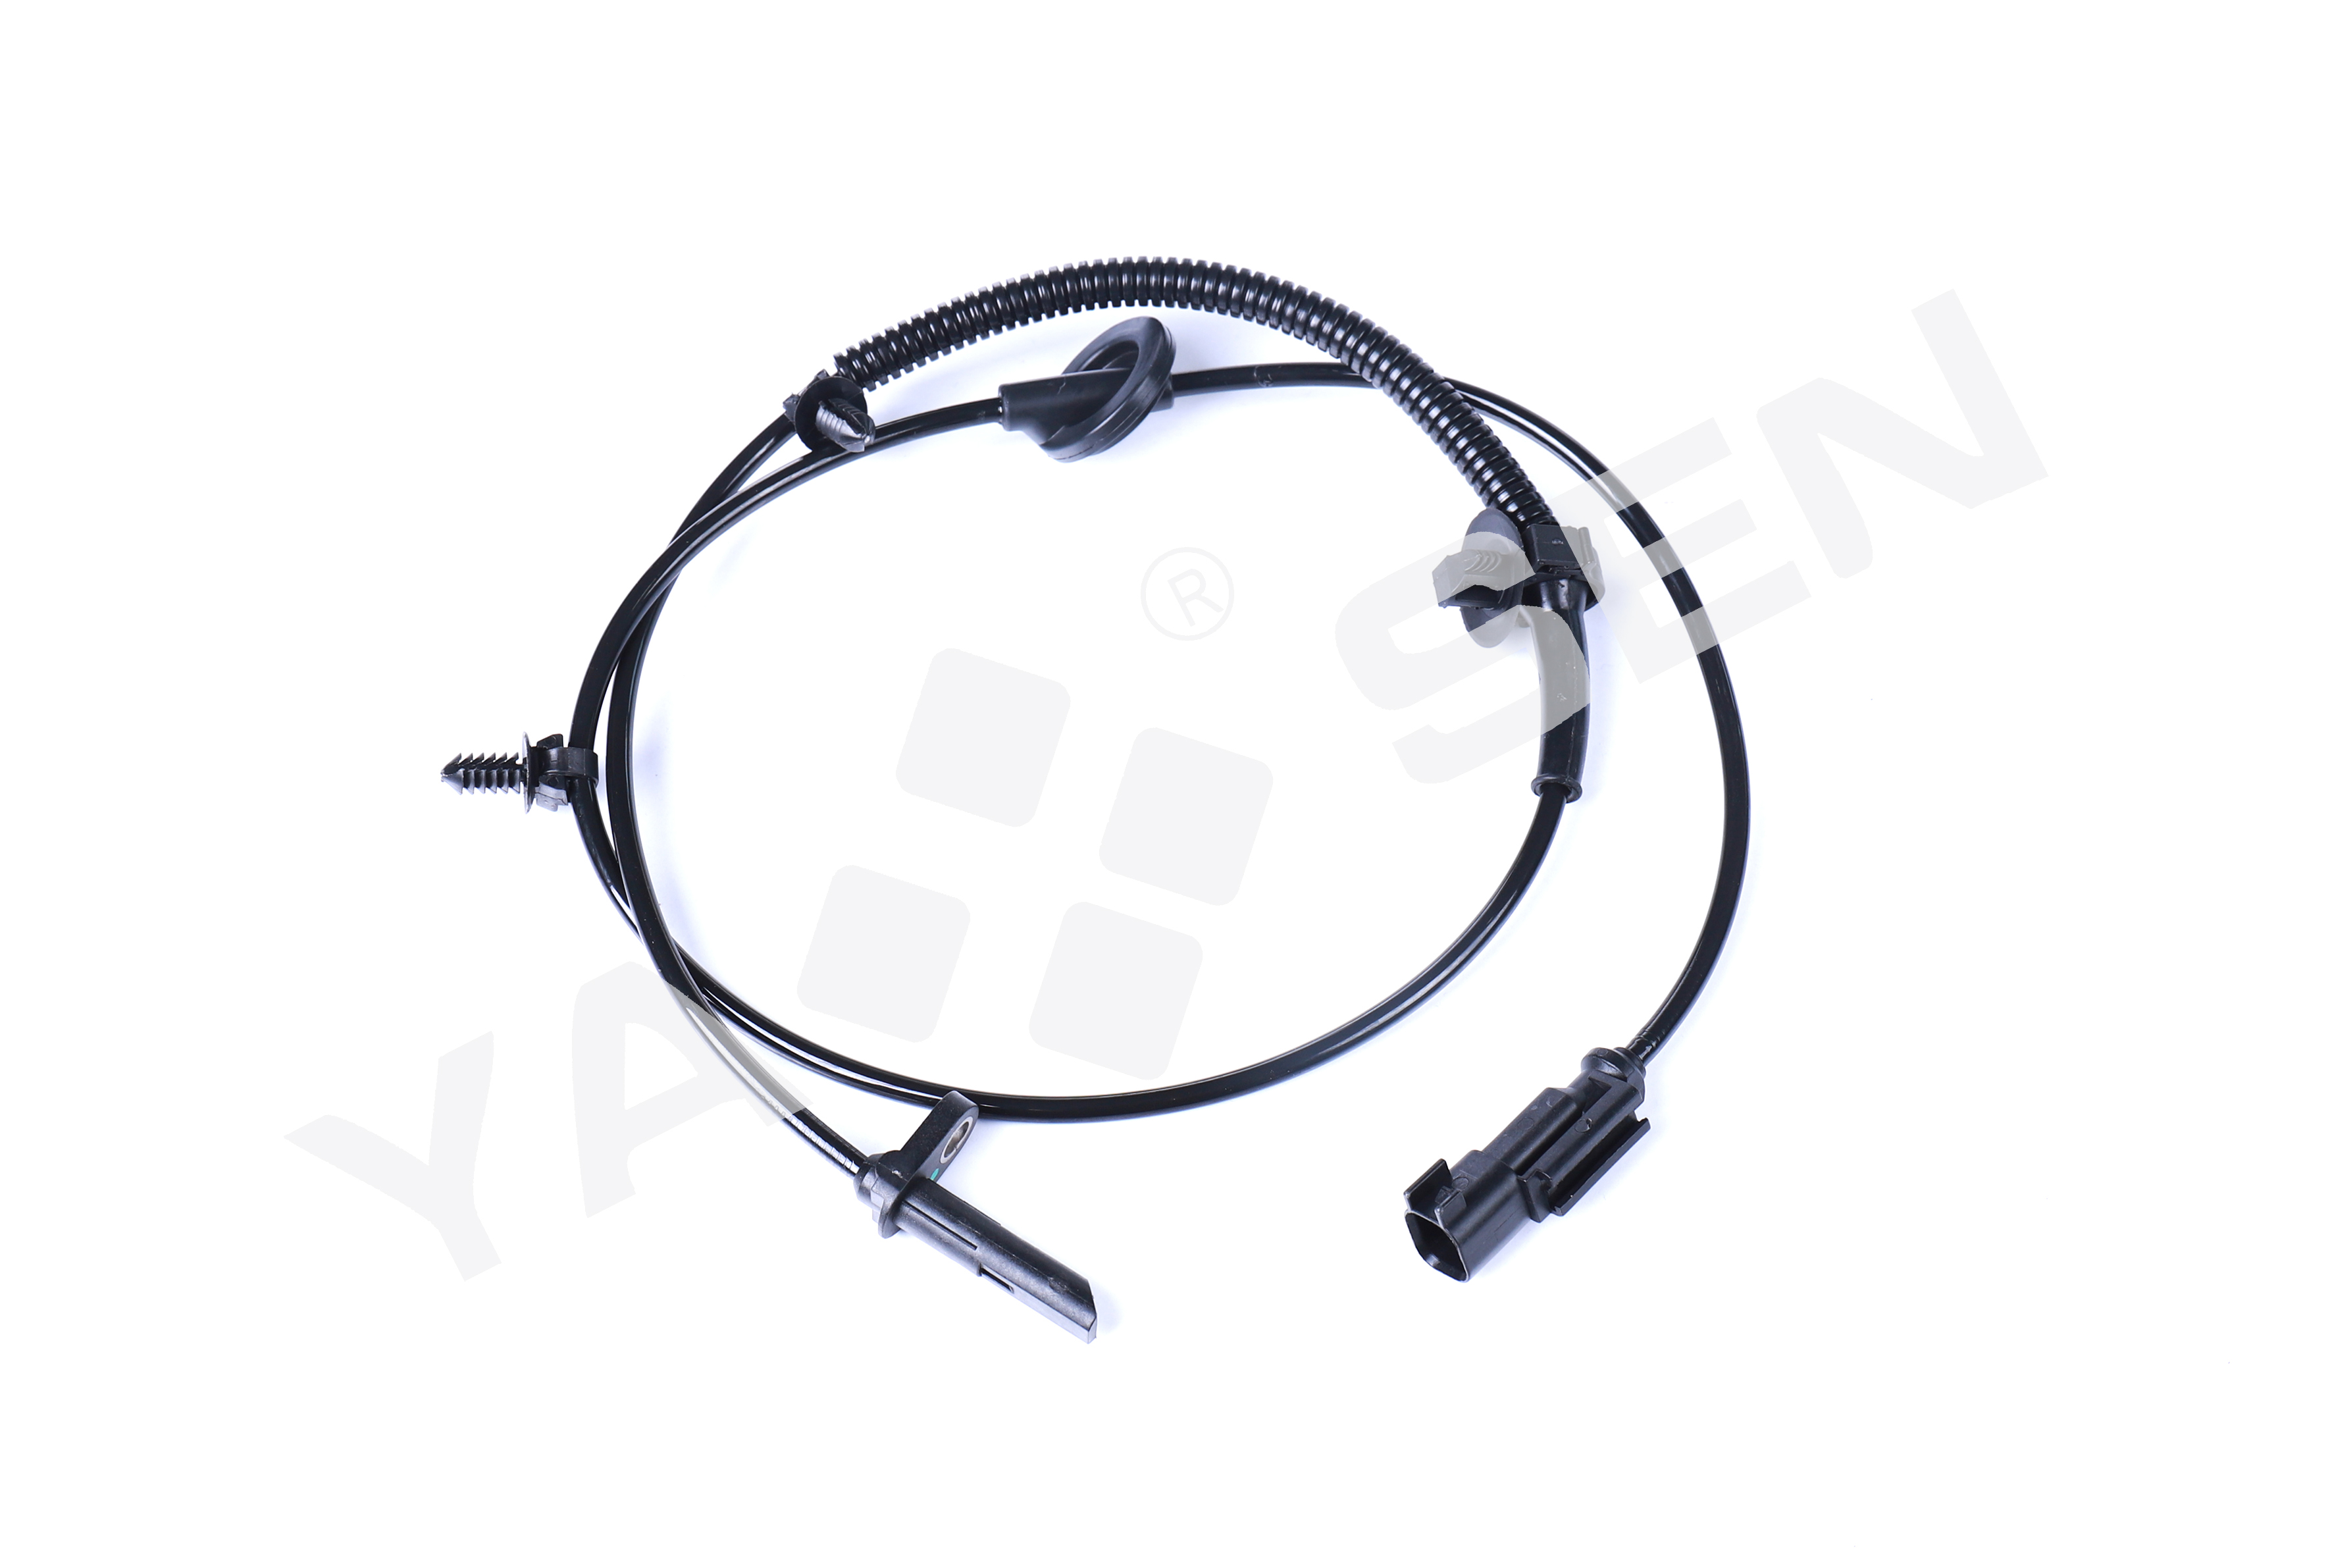 ABS Wheel Speed Sensor for FORD/CHEVROLET   10390115 20883057 22739727 25832011 SU12720 5S11267 ALS2039